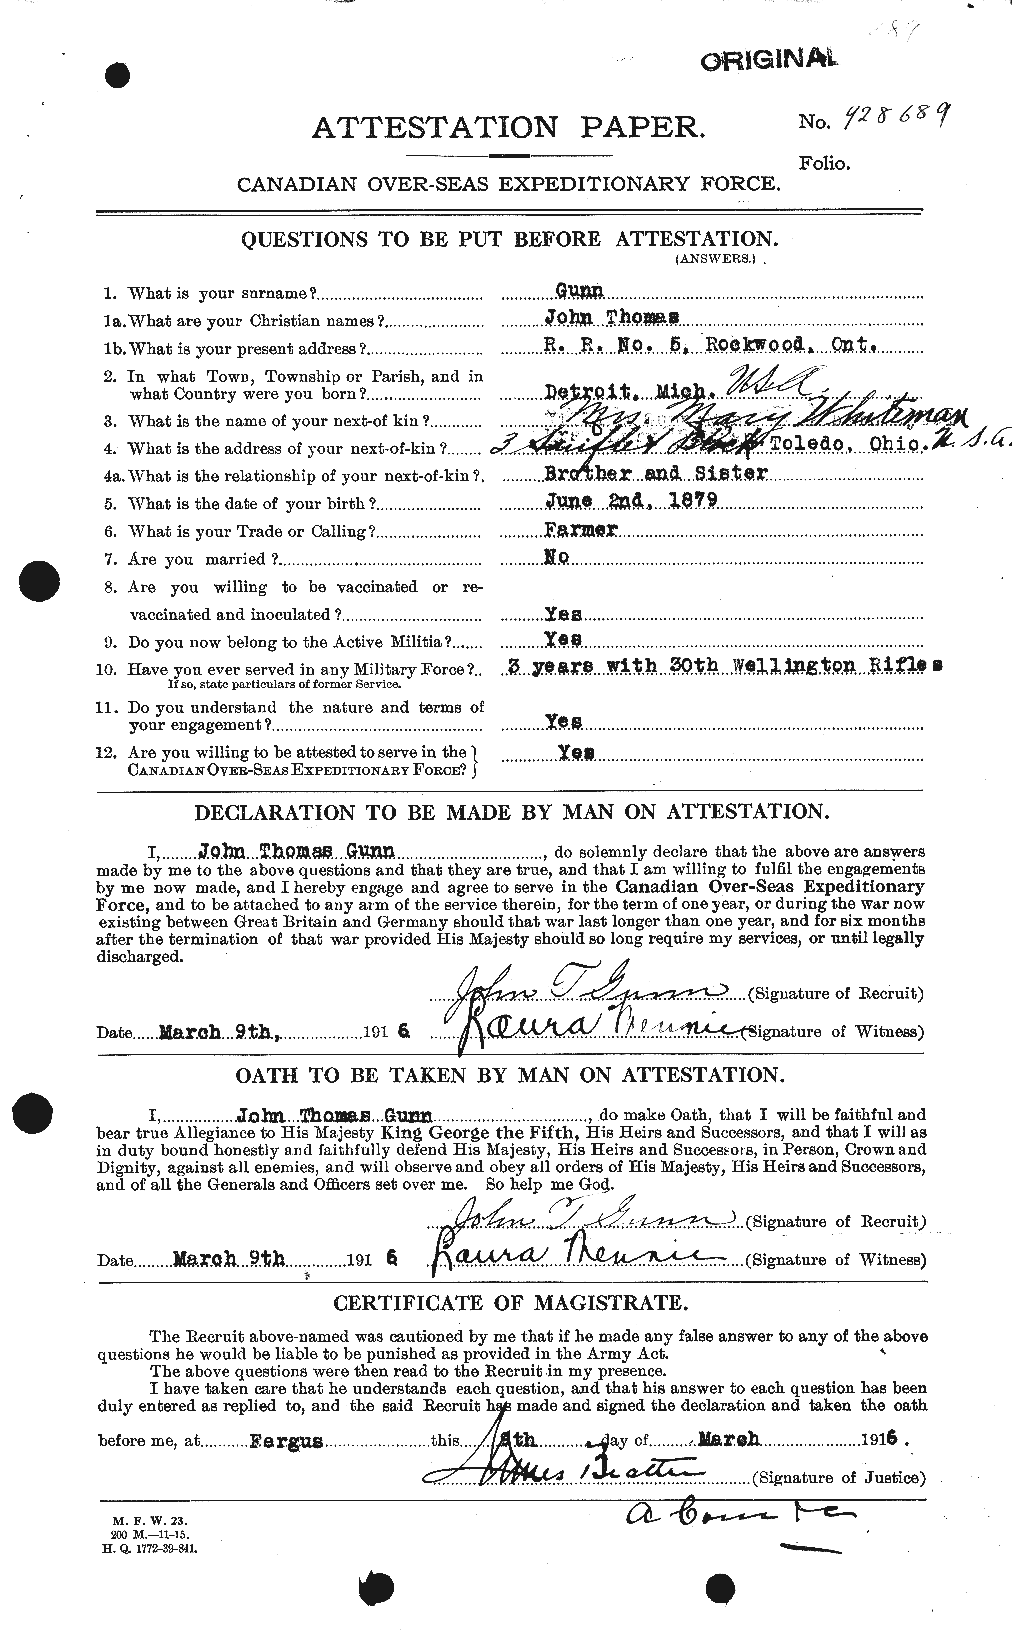 Personnel Records of the First World War - CEF 369303a